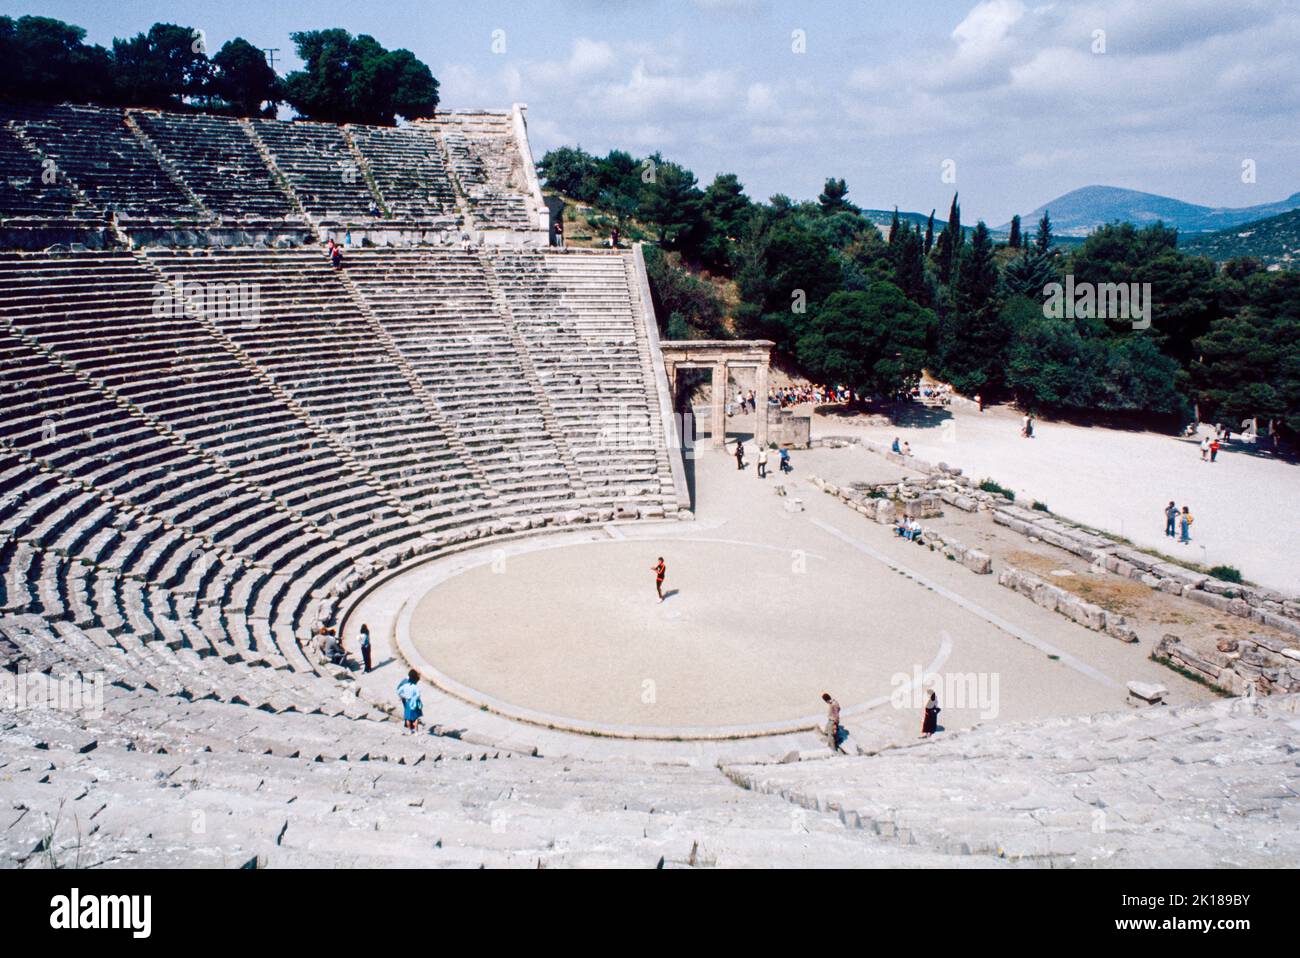 Theatre at Epidaurus - a small city (polis) in ancient Greece, on the Argolid Peninsula at the Saronic Gulf, best known for its ancient Greek sanctuary. March 1980. Archival scan from a slide. Stock Photo